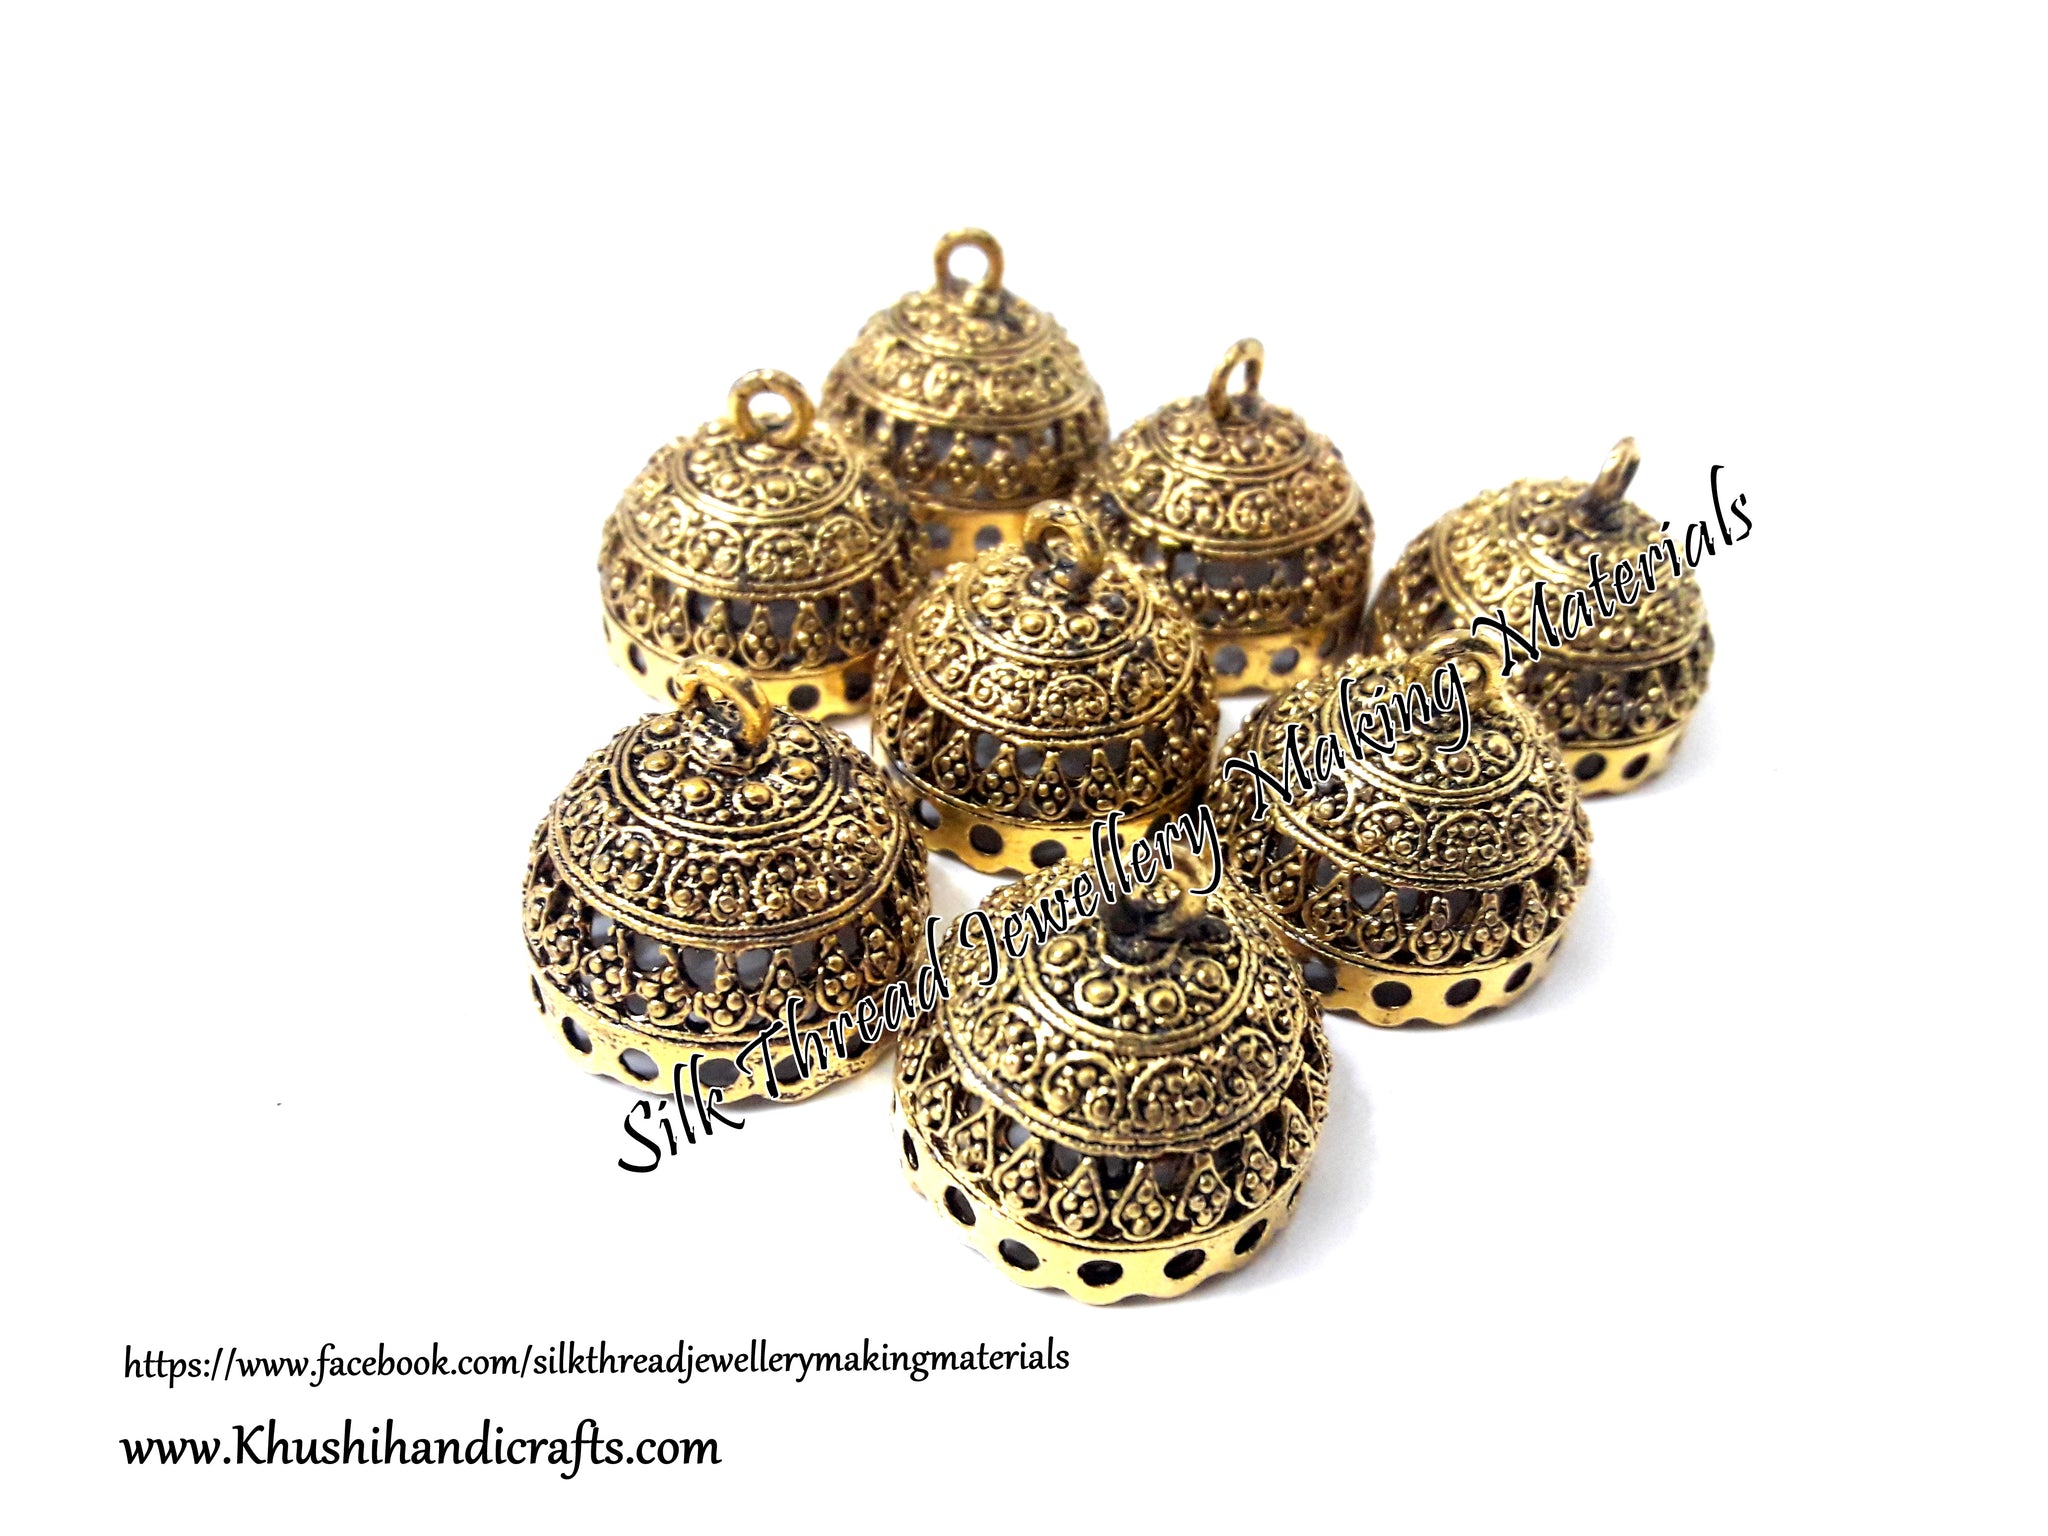 German Silver Jhumka Base in antique Gold